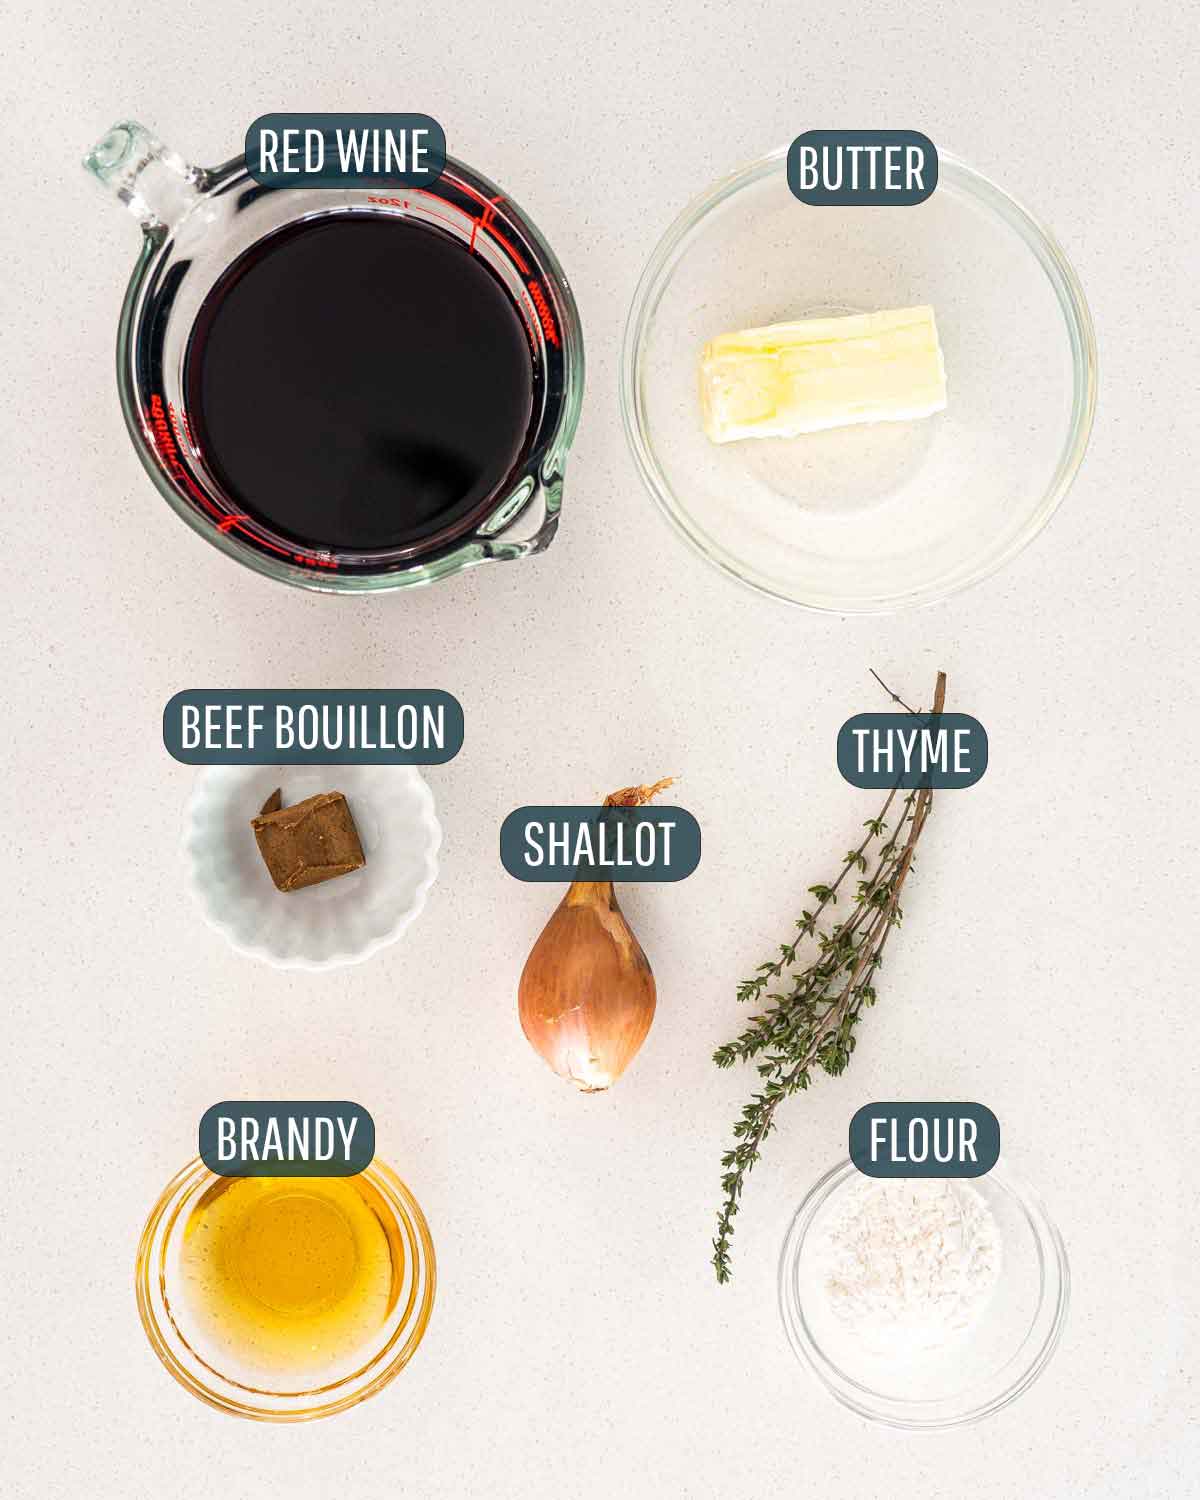 ingredients needed to make a reduced red wine sauce.